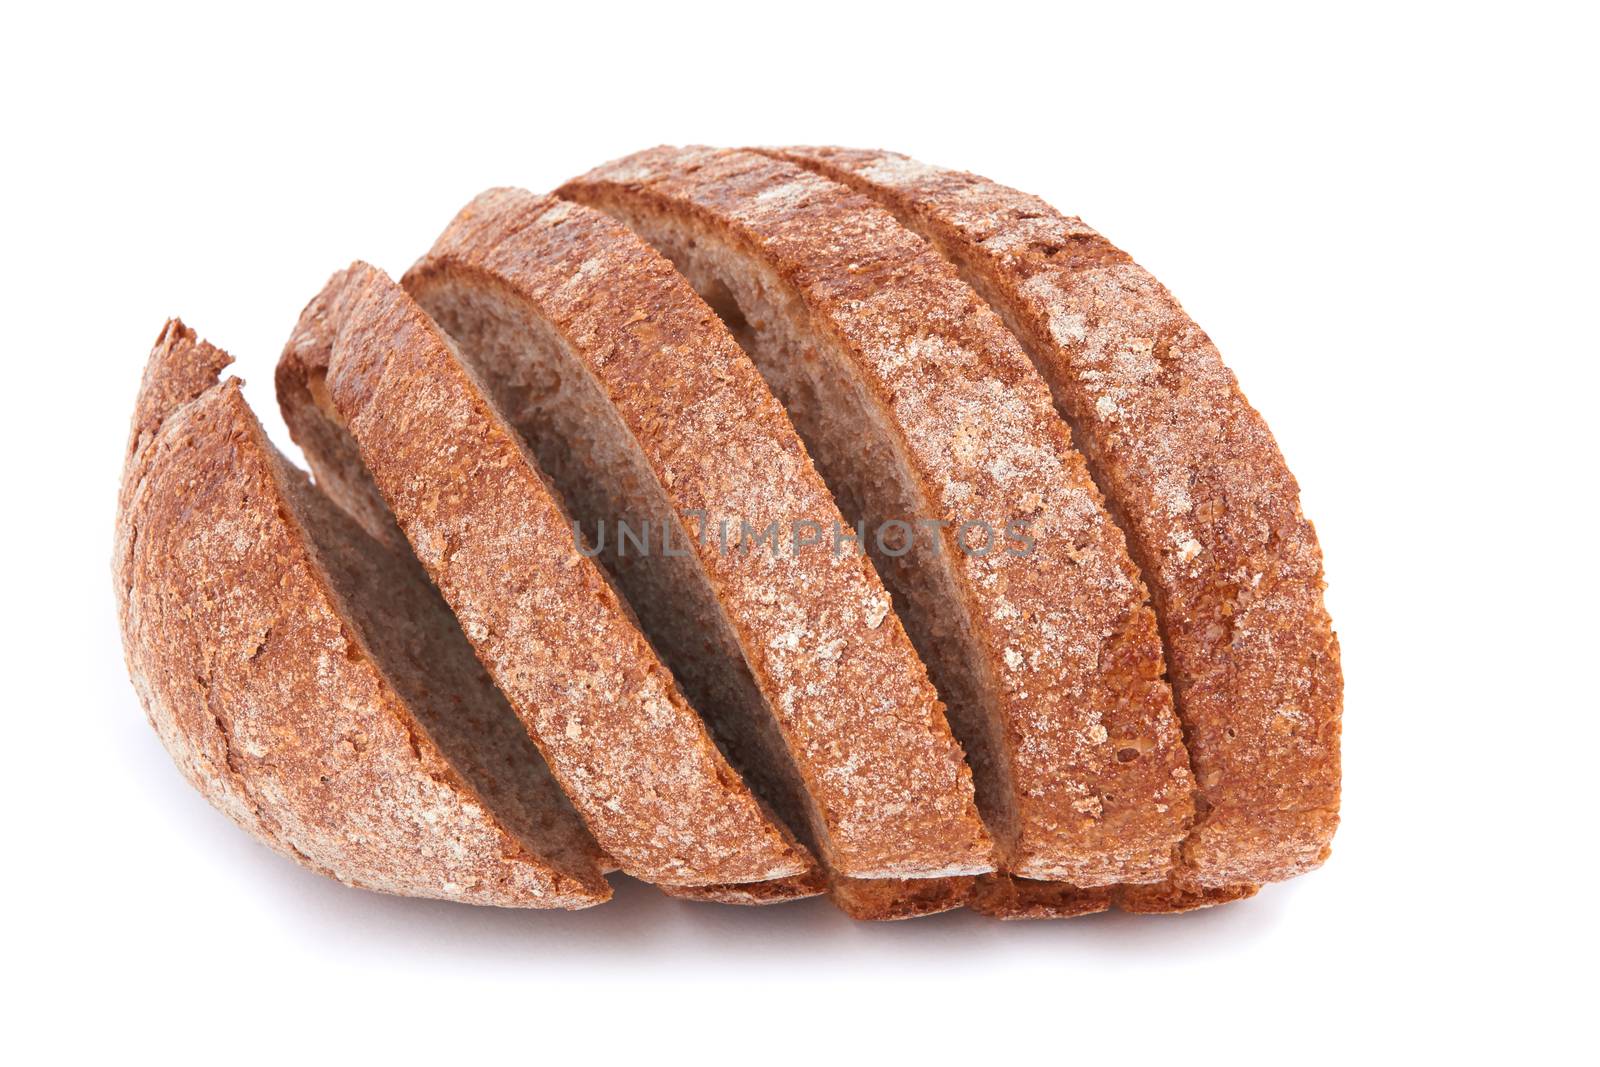 sliced bread isolated on a white background